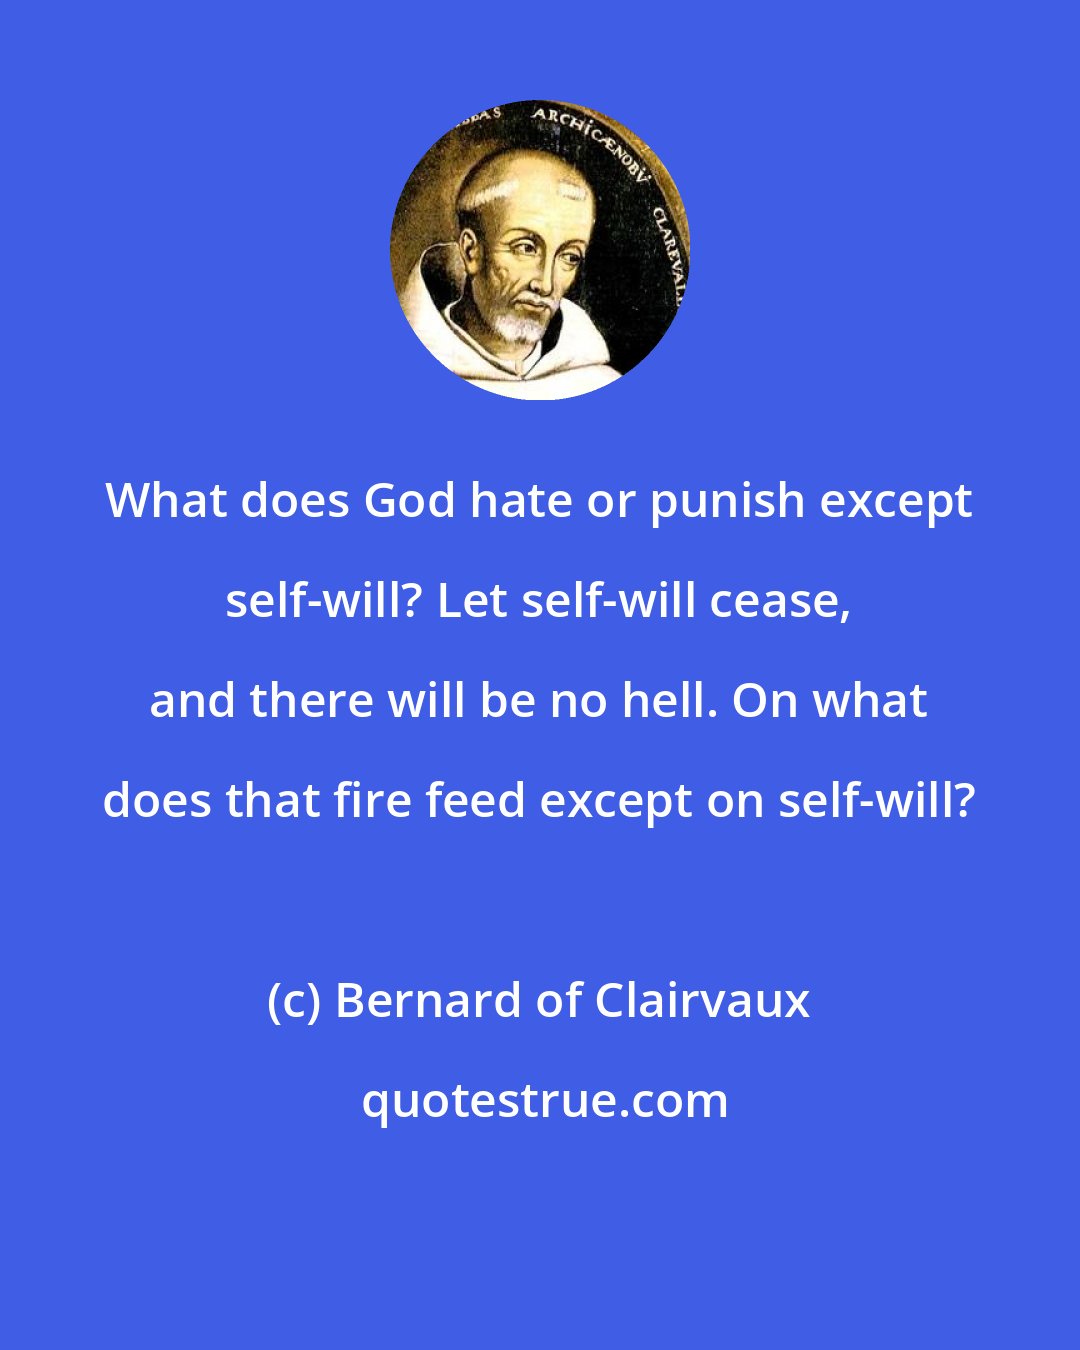 Bernard of Clairvaux: What does God hate or punish except self-will? Let self-will cease, and there will be no hell. On what does that fire feed except on self-will?